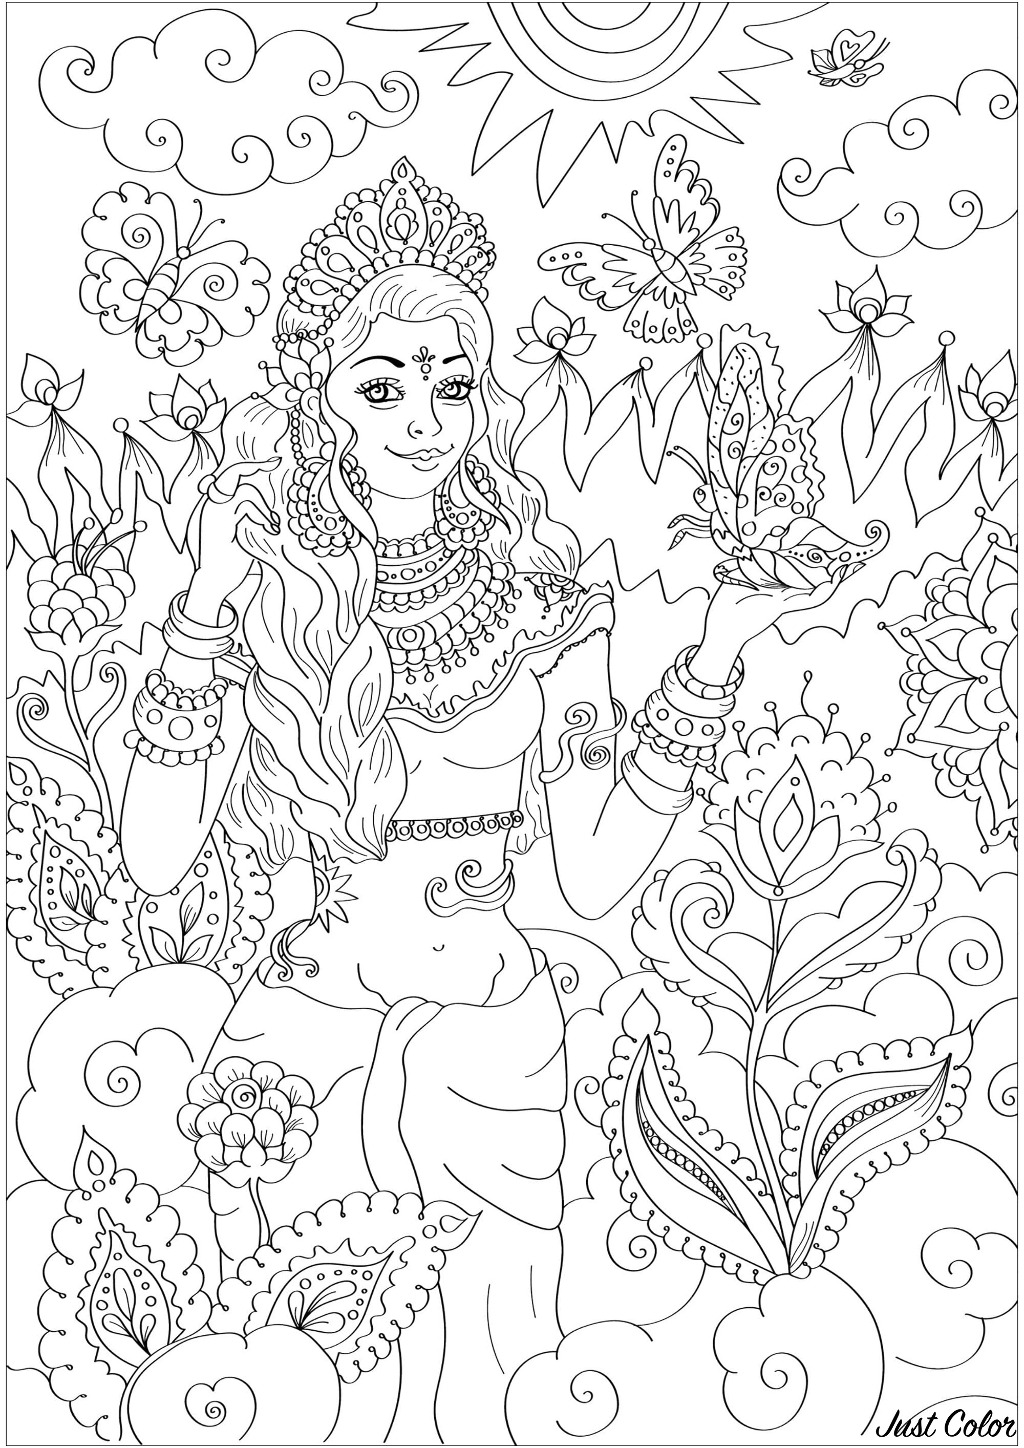 Indian goddess with buterflies and strange flowers and leaves